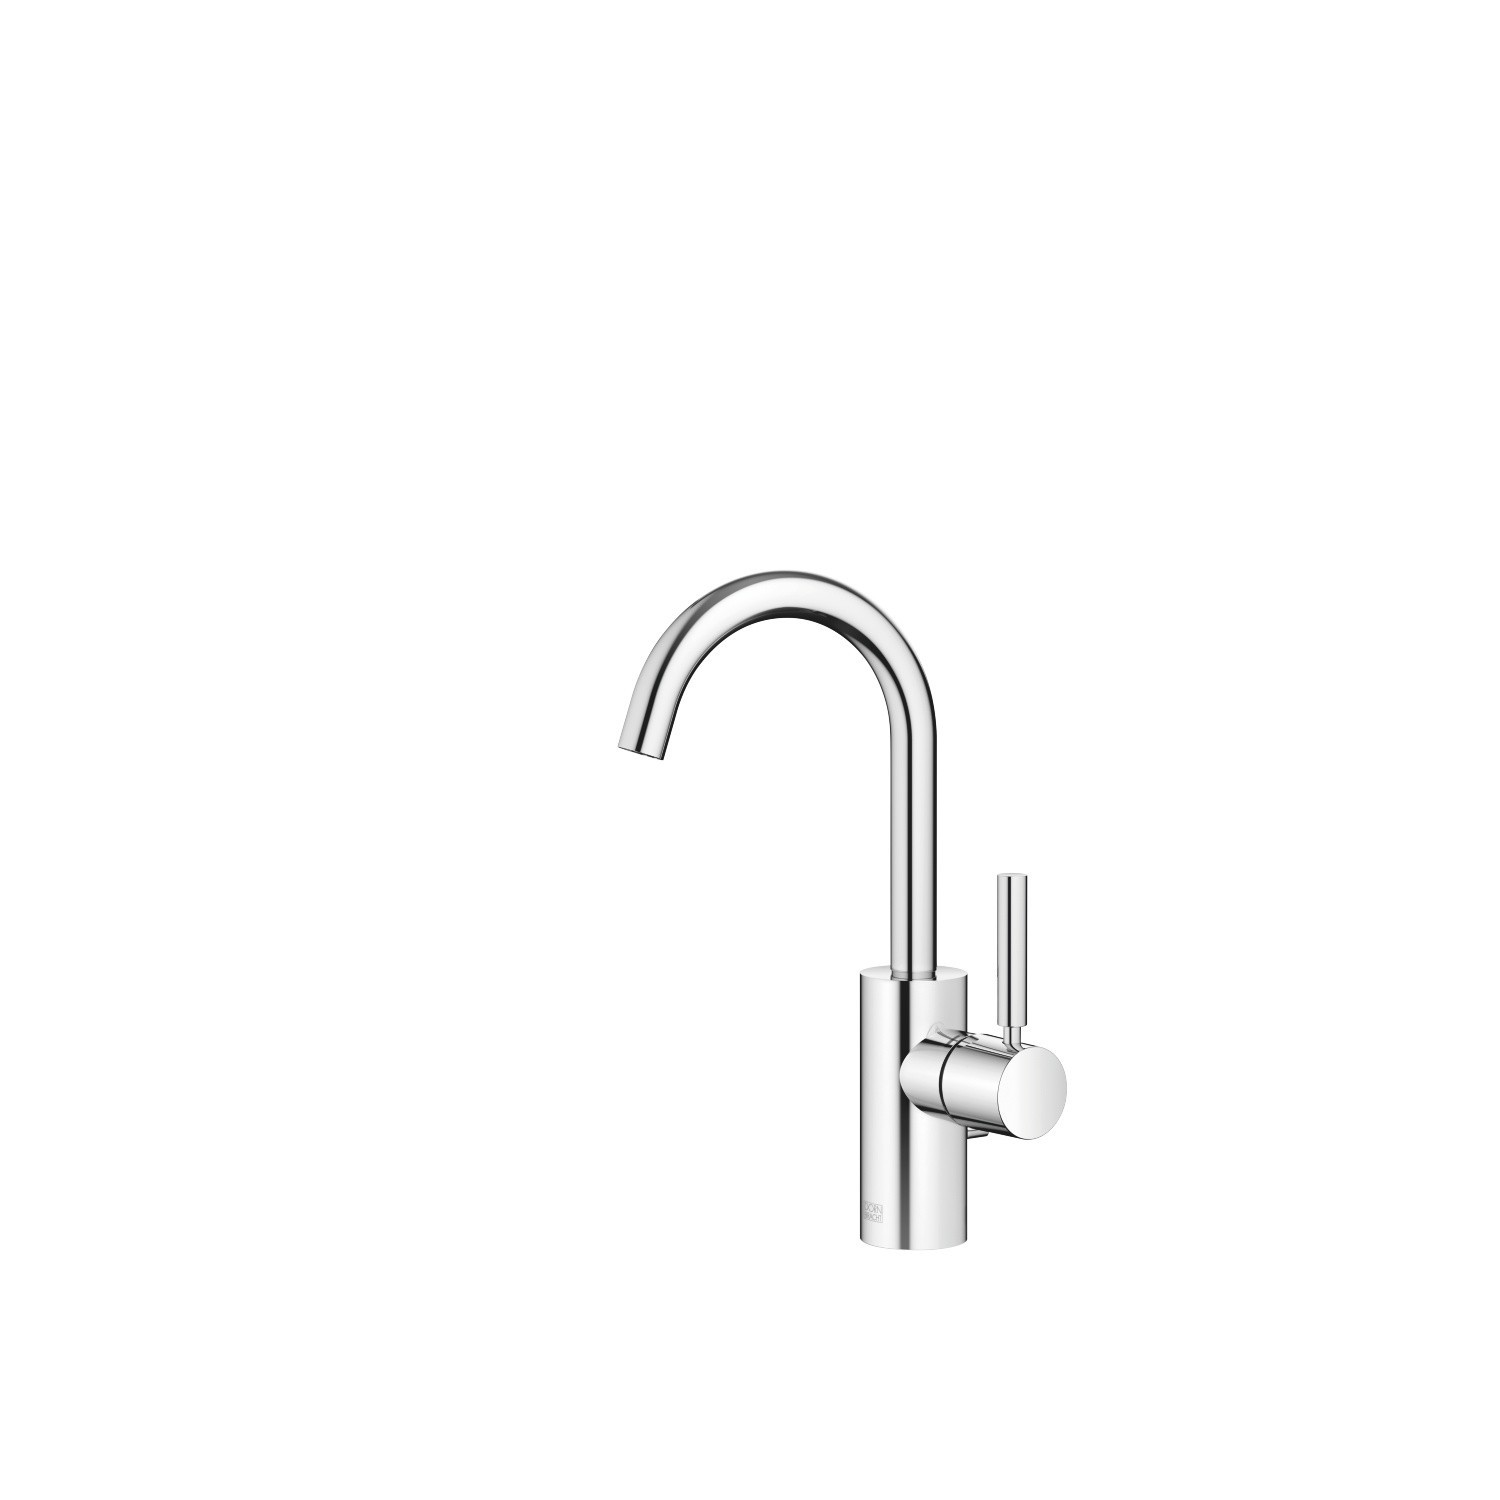 DORNBRACHT 33510661-0010 META 10 3/4 INCH SINGLE HOLE DECK MOUNT LAVATORY MIXER WITH DRAIN AND LEVER HANDLE